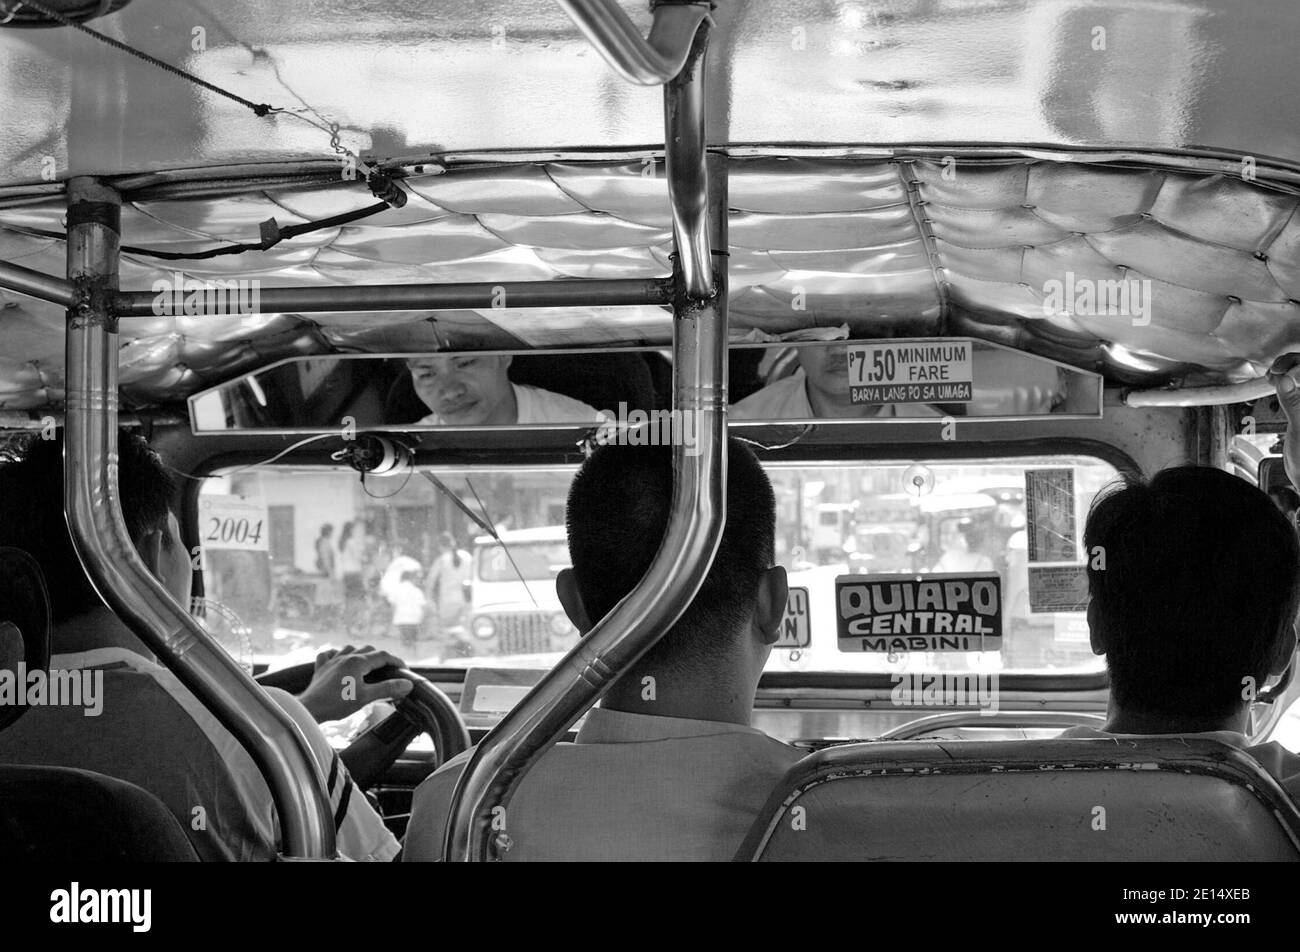 Three men, including the driver, sit in the front seat of a jeepney in Manila, the Philippines.  The interior photo from 2005 shows the destination placard stating the route of Quiapo Central Mabini.  The iconic mass mode of transportation has become a cultural icon of the Philippines. Stock Photo